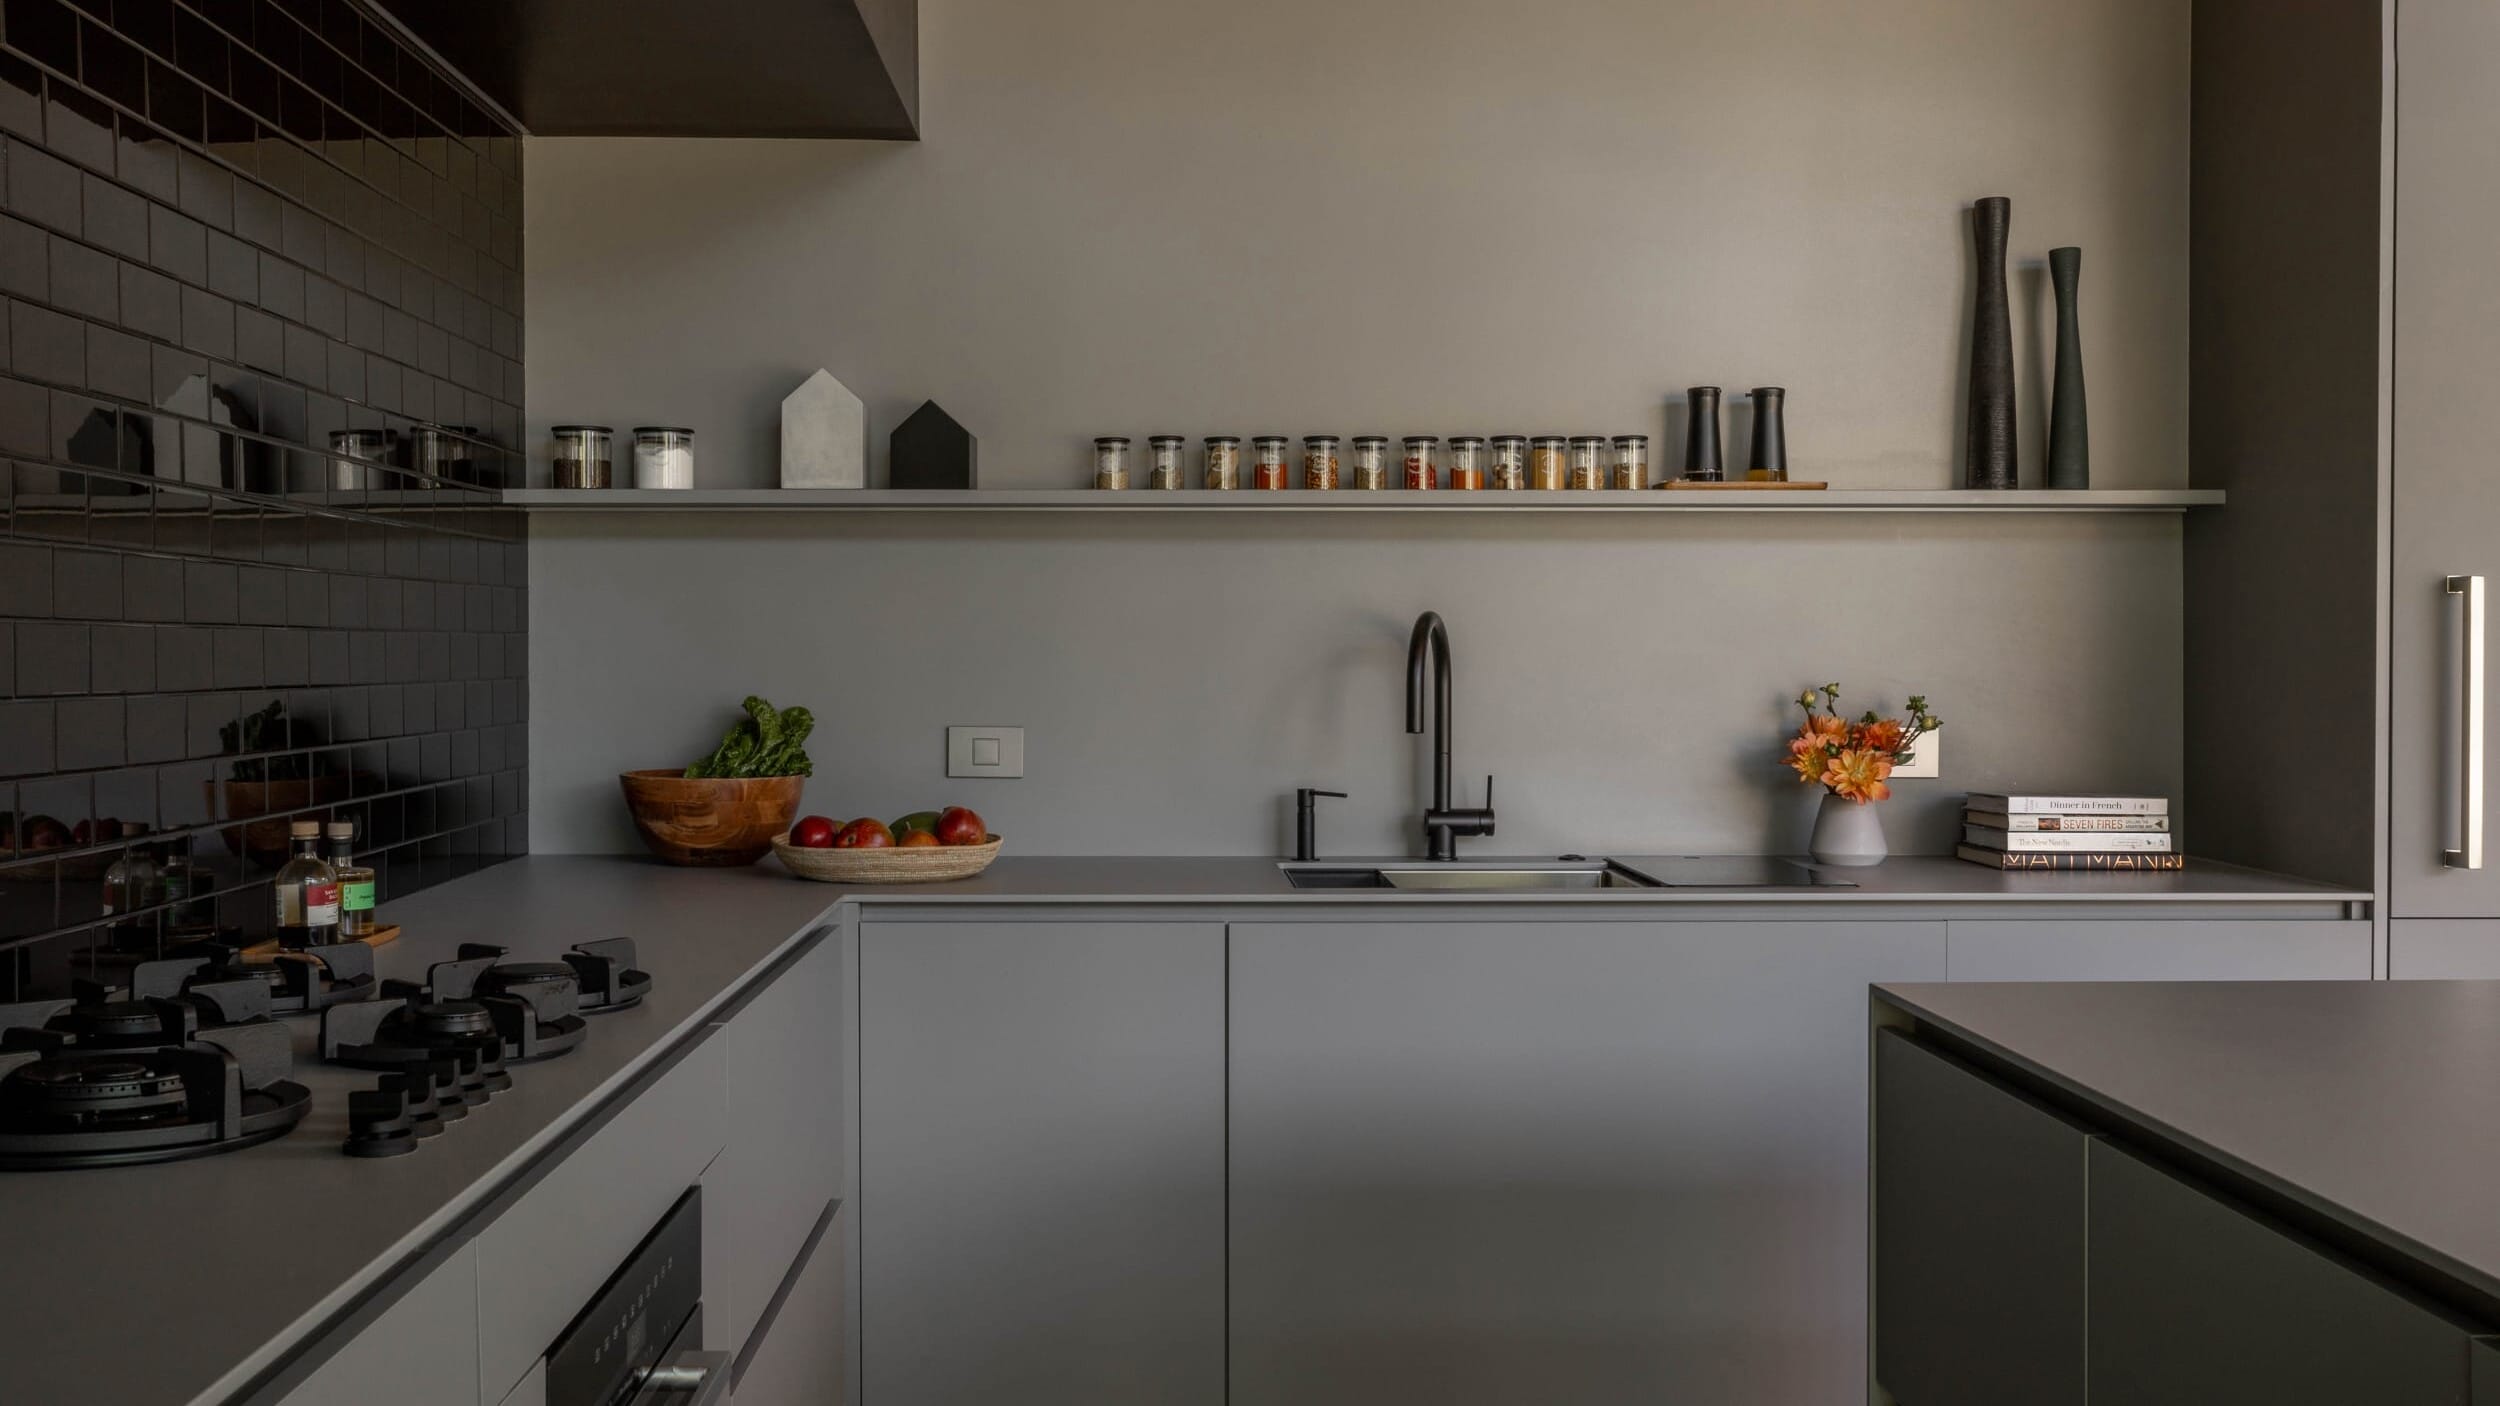 A modern kitchen with black and grey tiled walls.